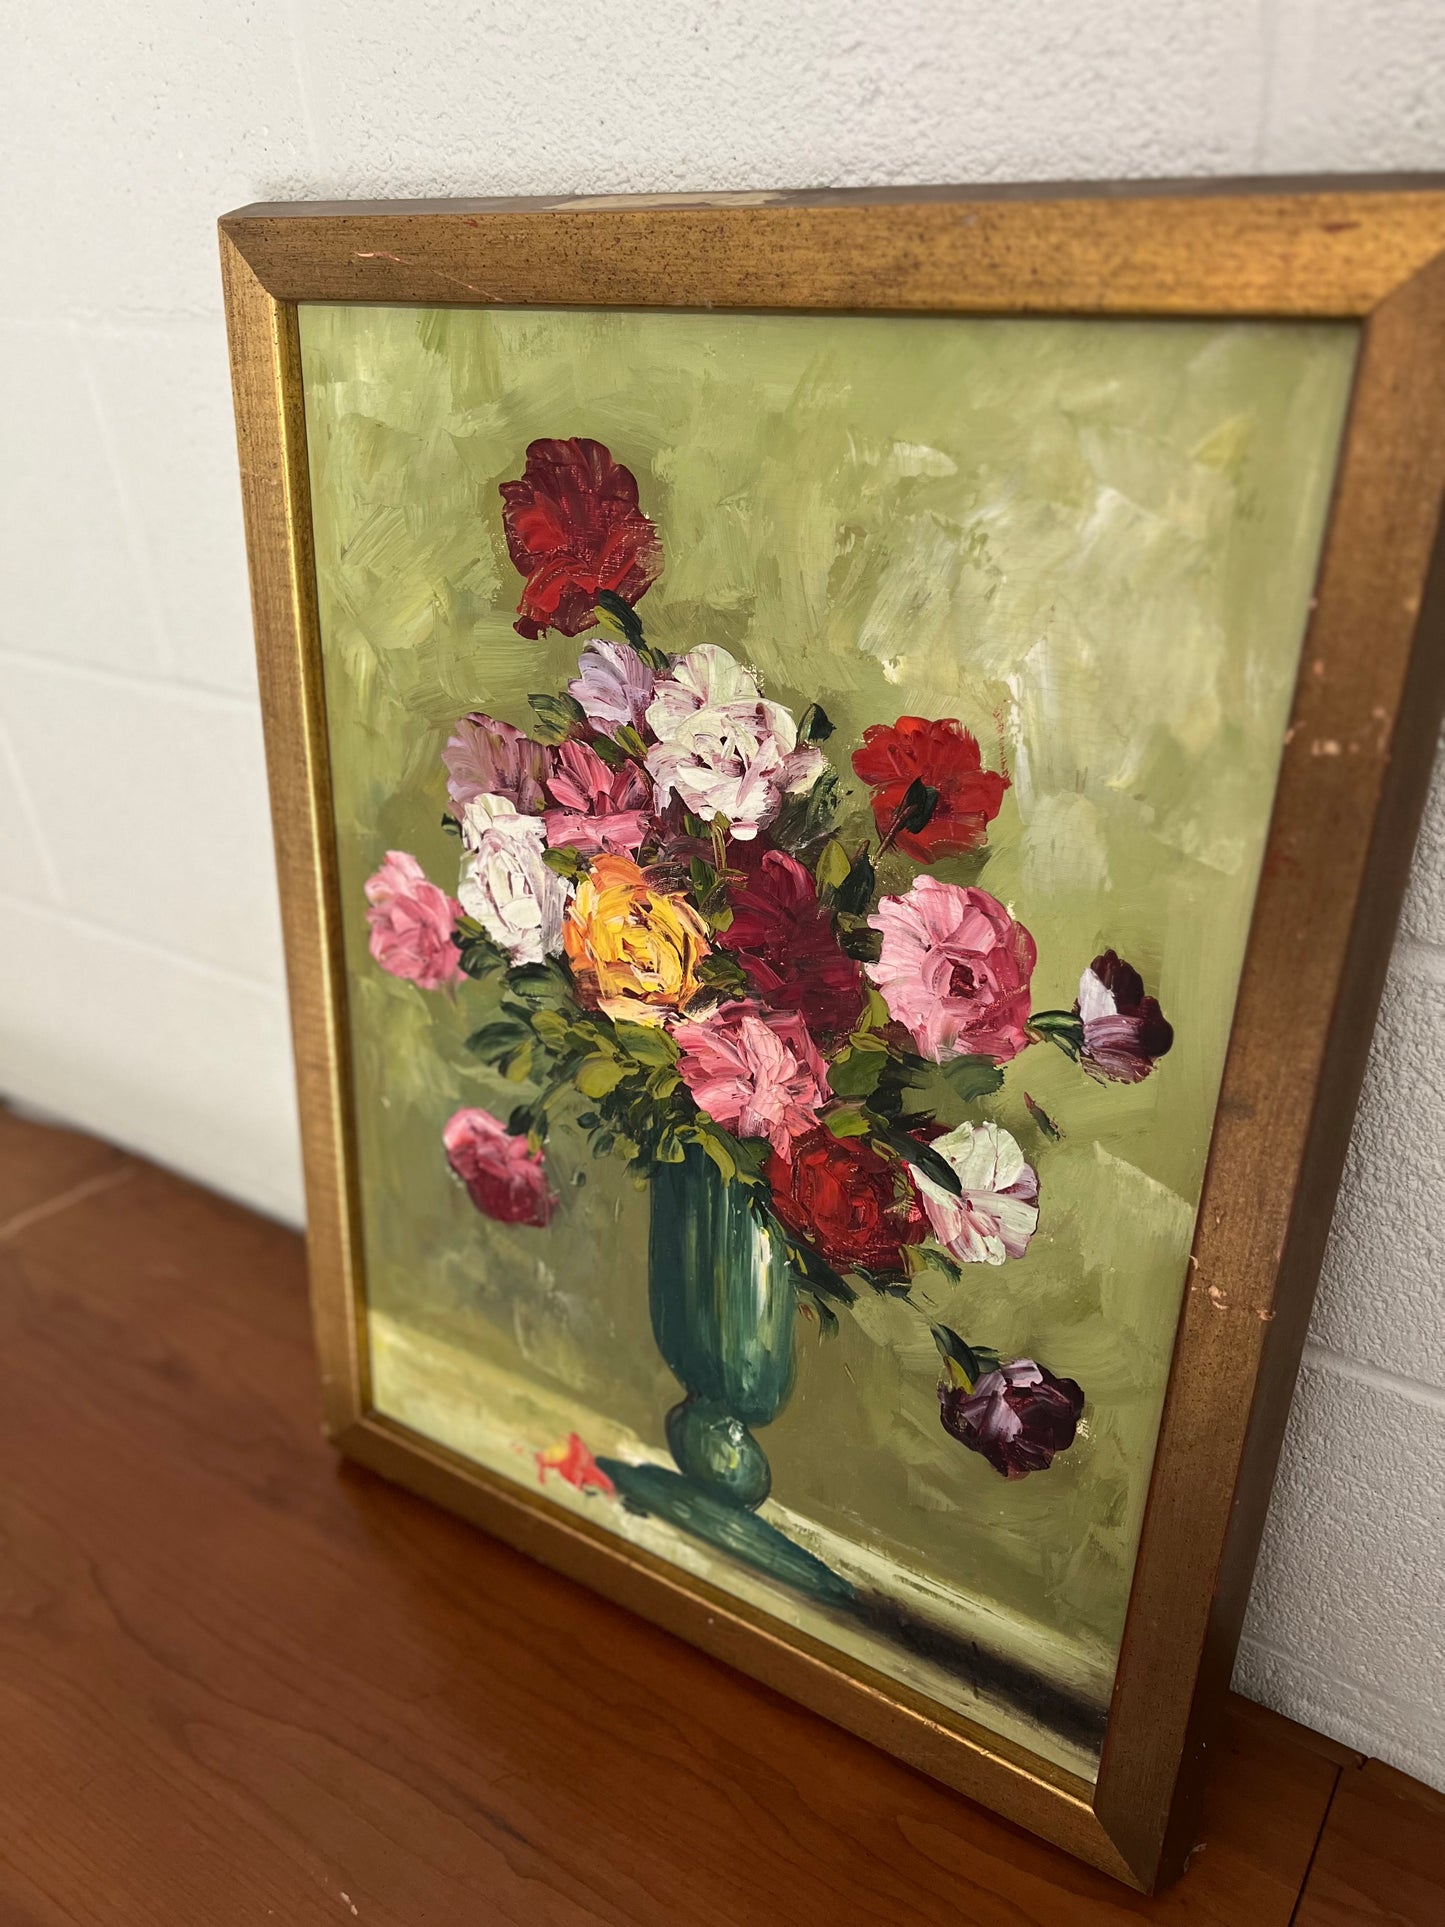 Framed Flower Bouquet Oil Painting on Canvas - Signed by Artist